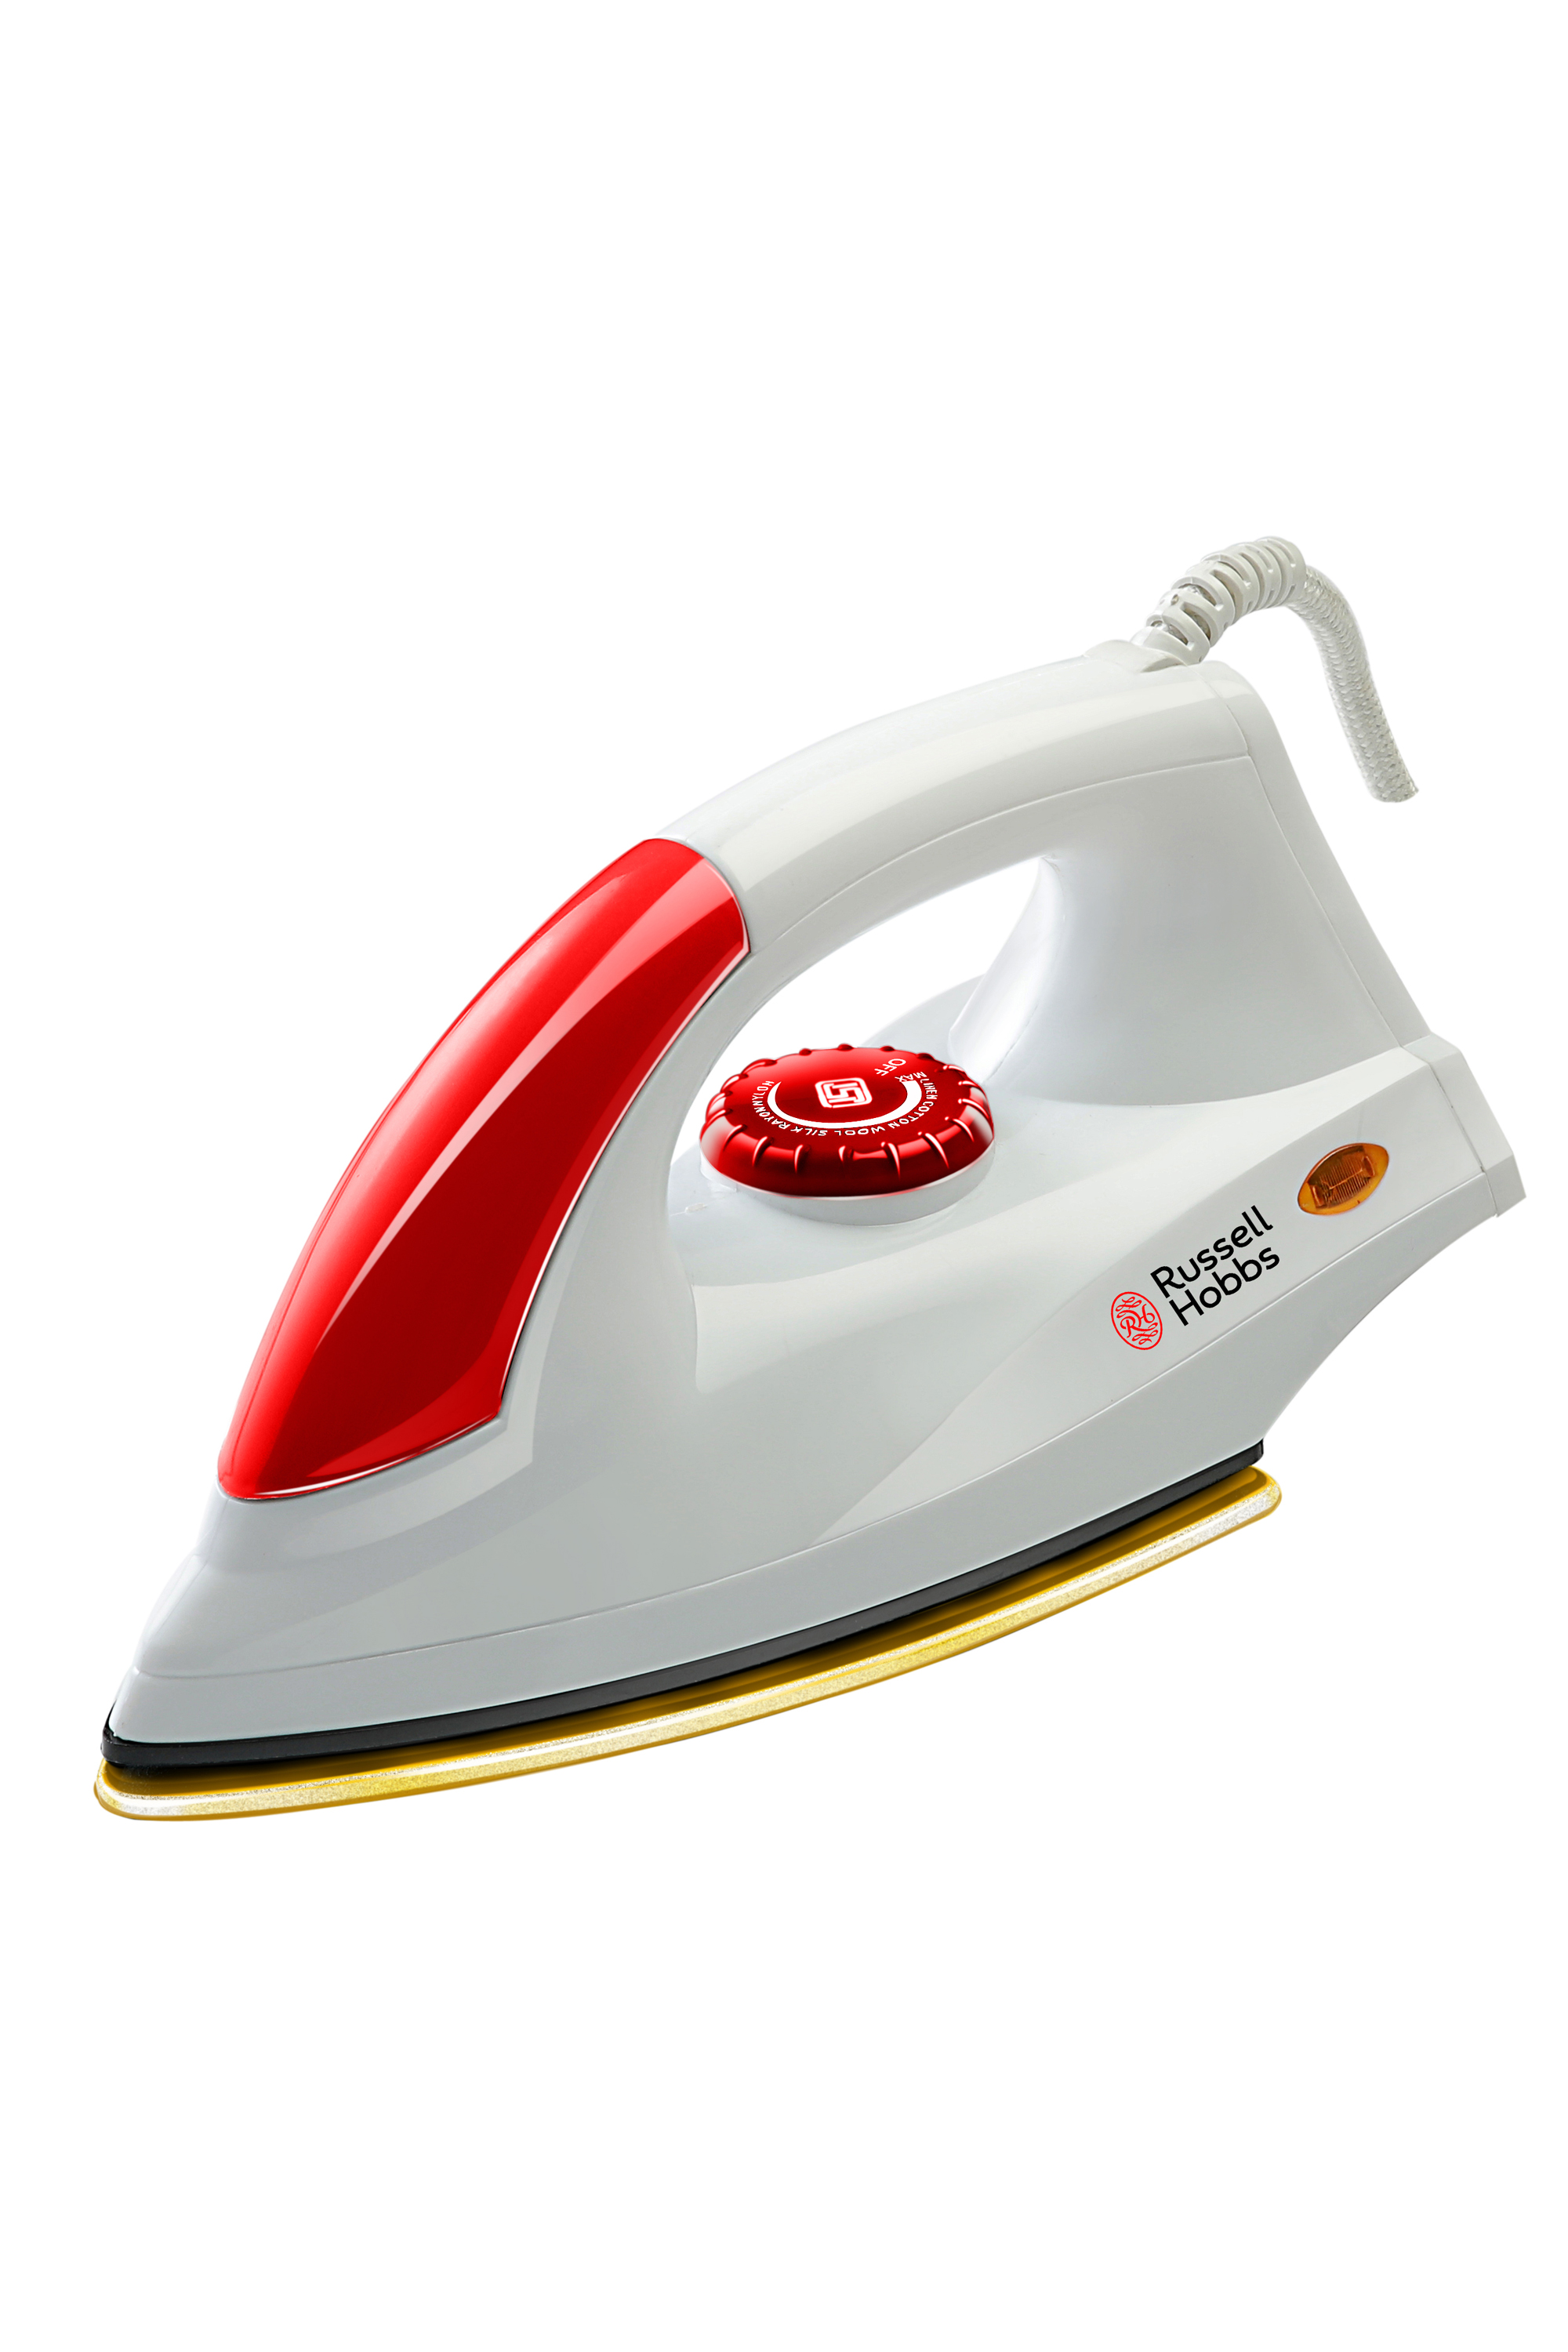 Russell Hobbs Spectra Rdi1000 -1000 W Dry Iron